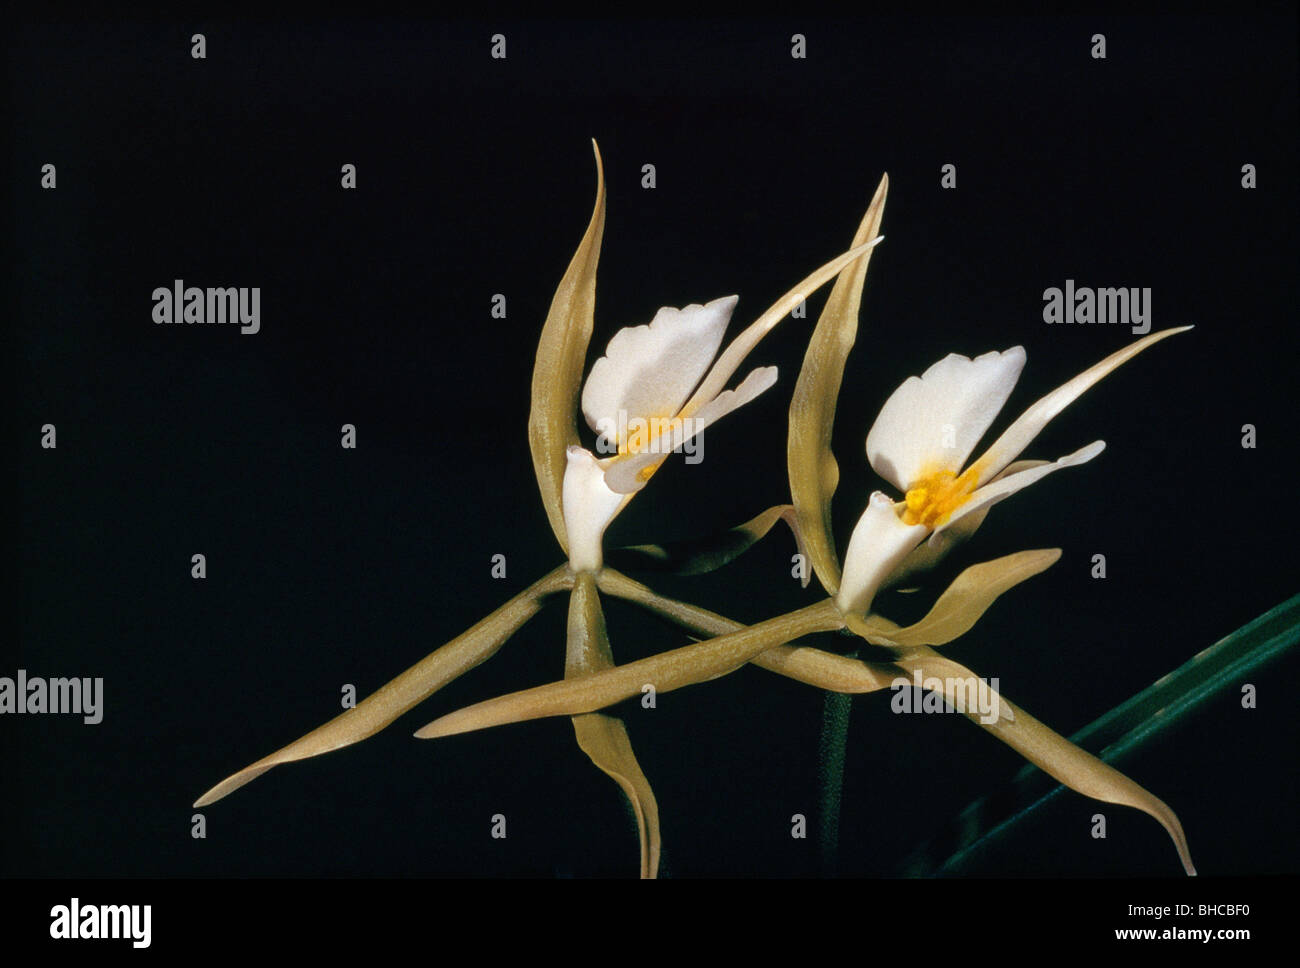 Epidendrum Orchids resembling ballet dancers. Stock Photo